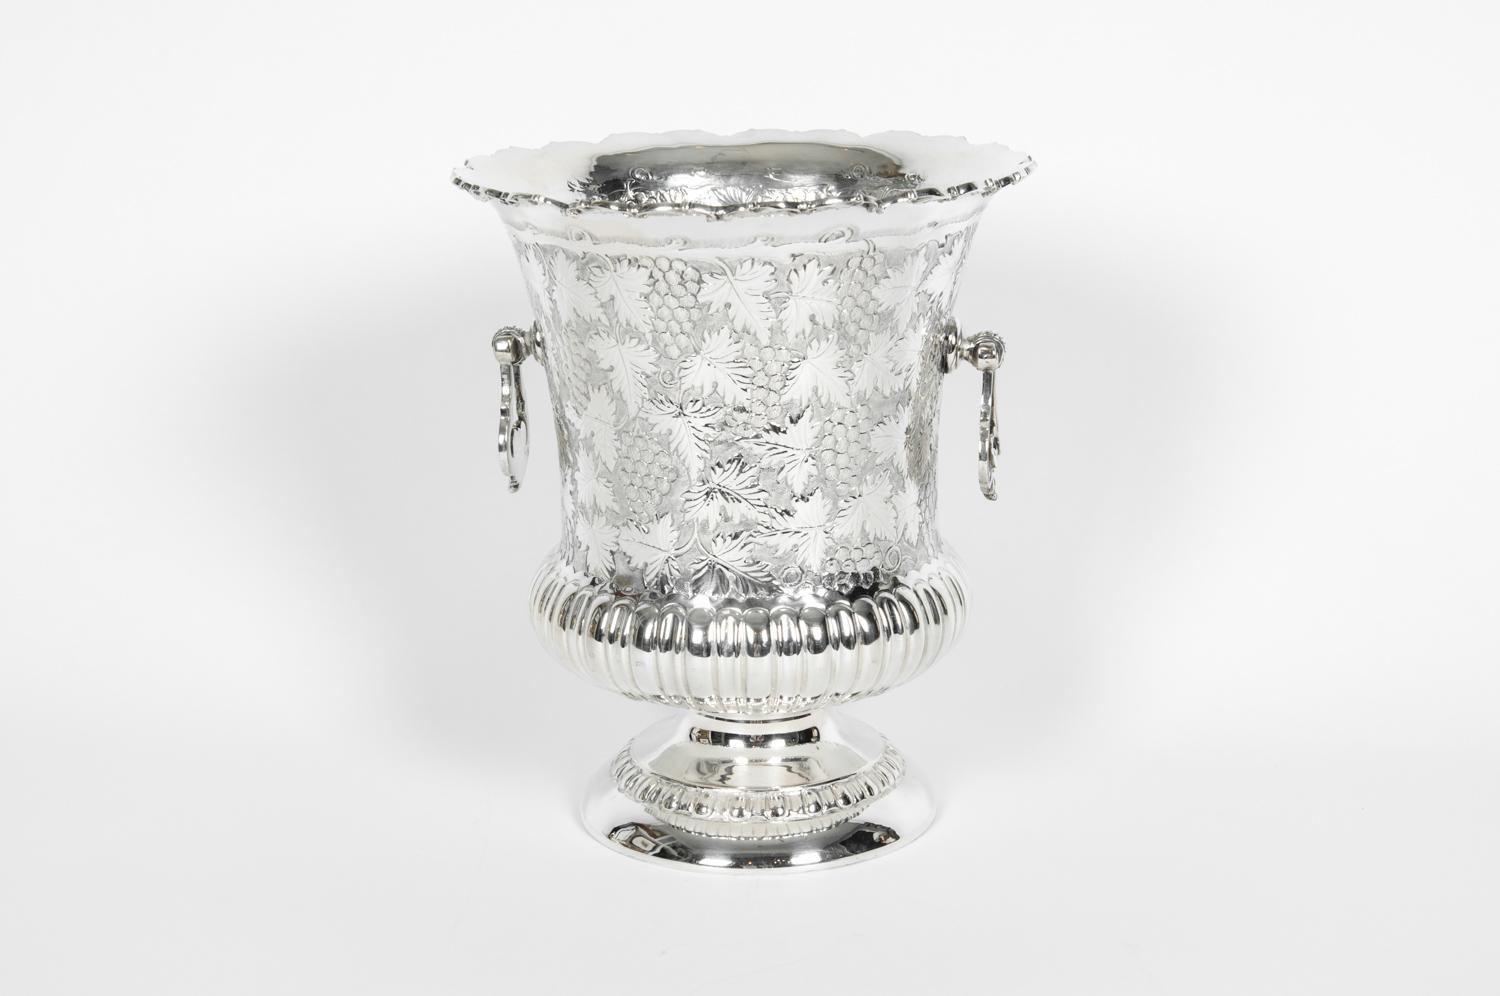 Italian Antique Sterling Silver Wine Cooler with Handles